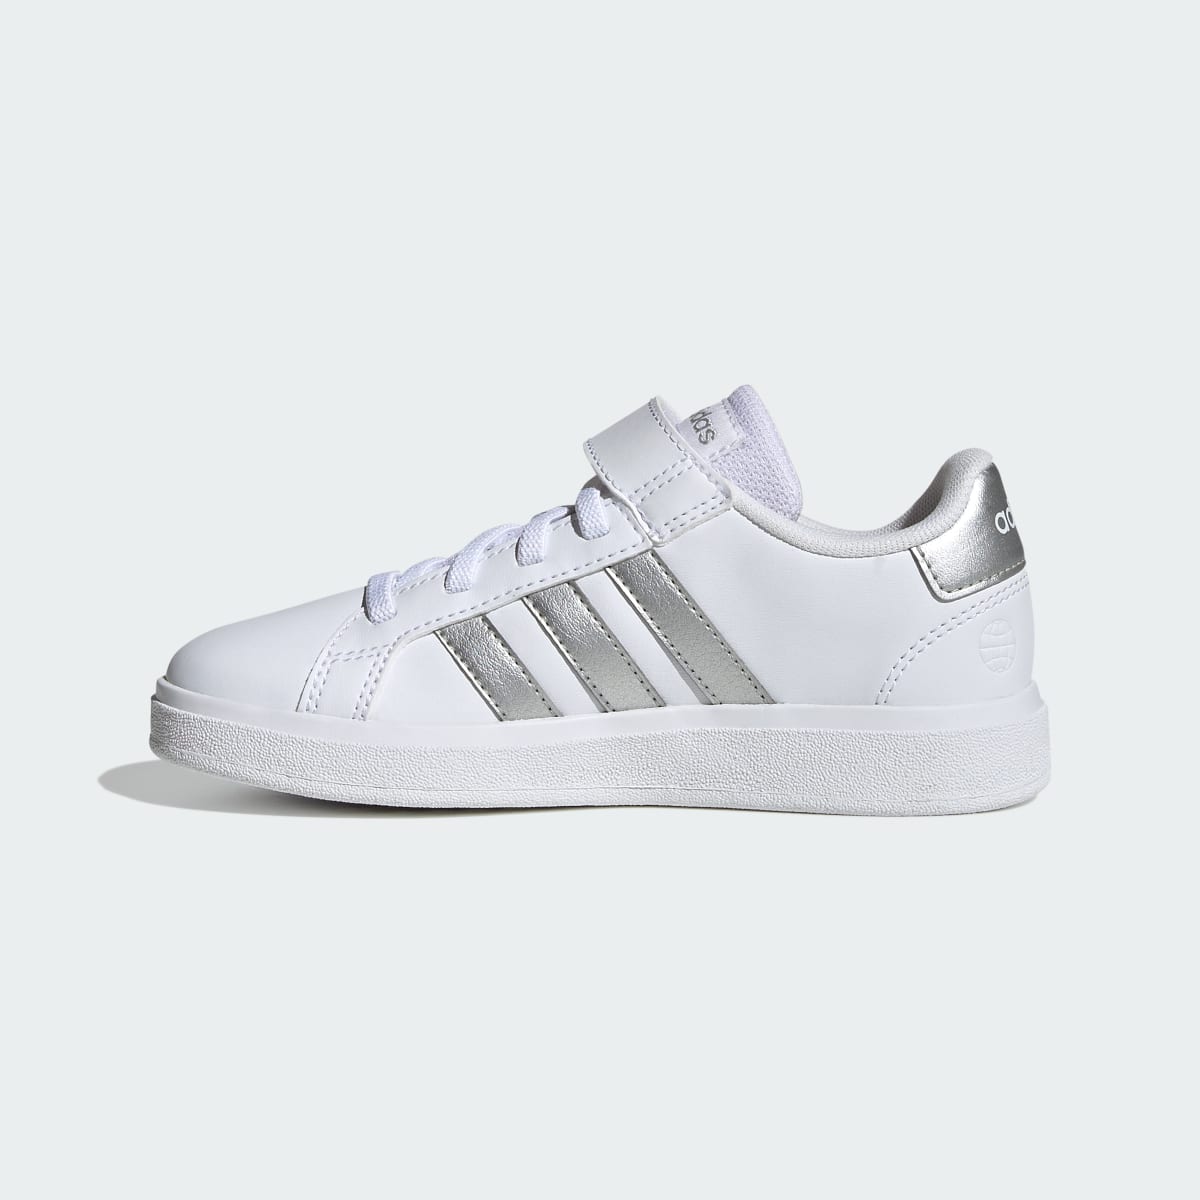 Adidas Grand Court Elastic Lace and Top Strap Shoes. 7